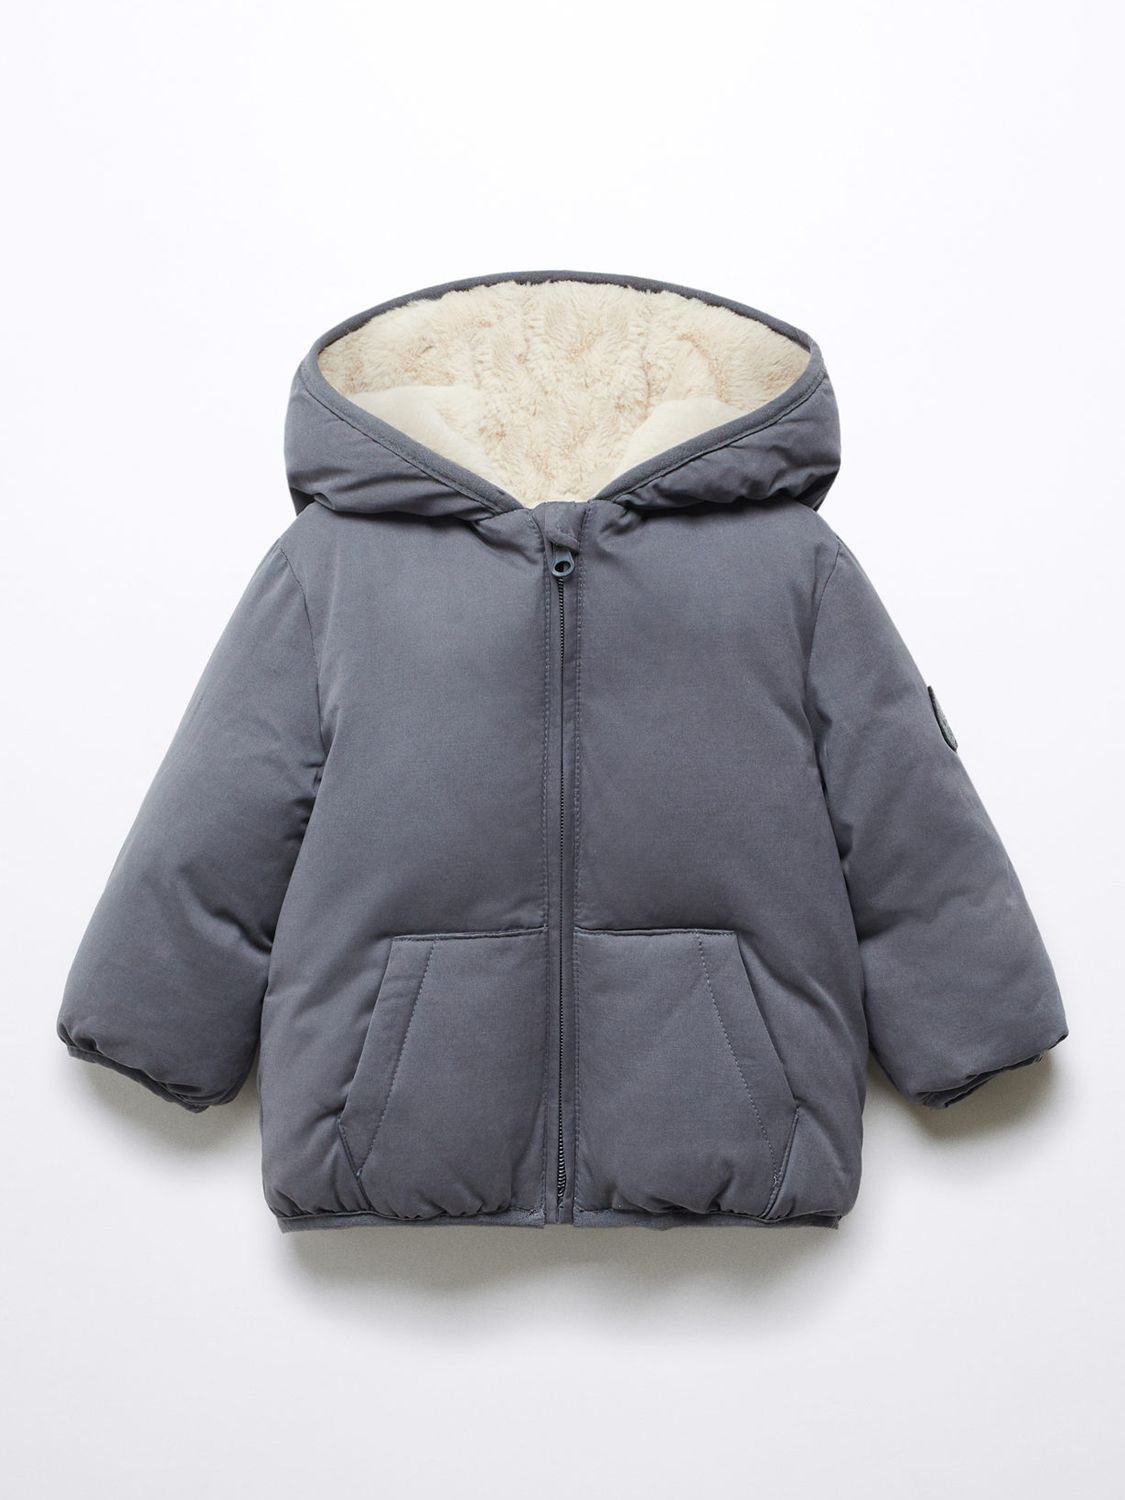 Mango Baby Jordi Faux Shearling Lined Hooded Jacket, Charcoal, 12-18 months